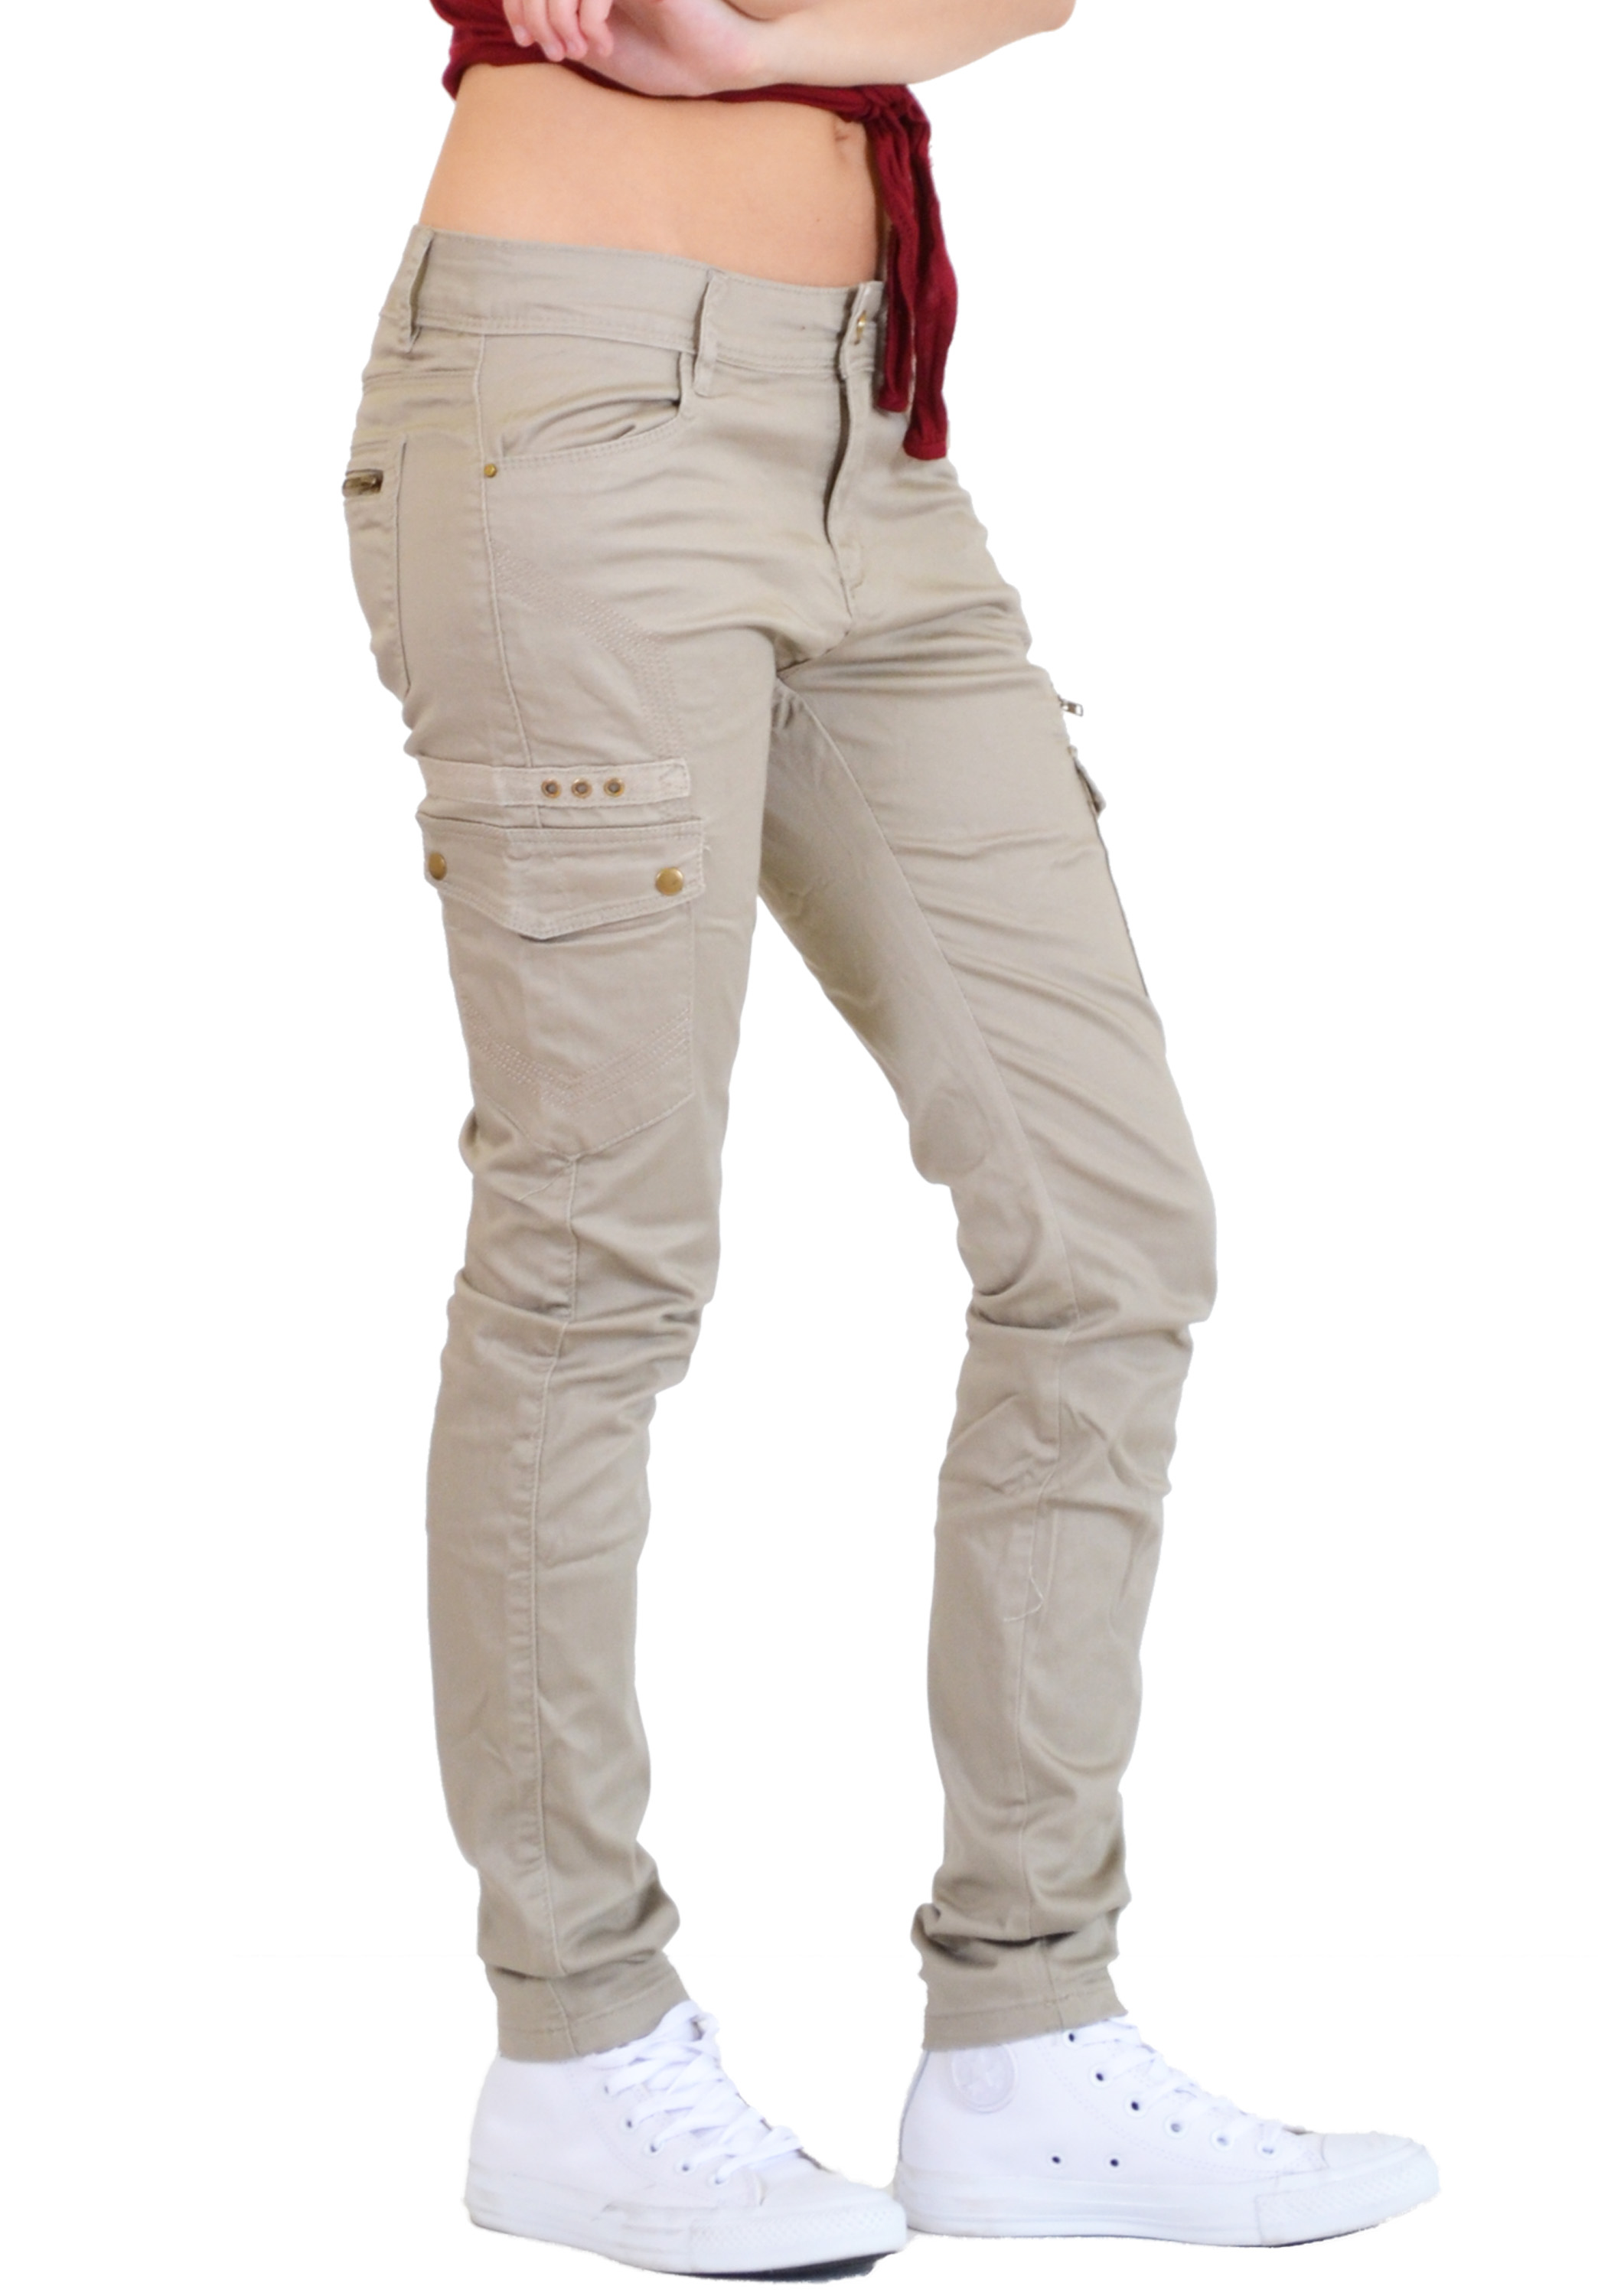 New Ladies Womens Slim Fitted Stretch Combat Jeans Pants Skinny Cargo ...